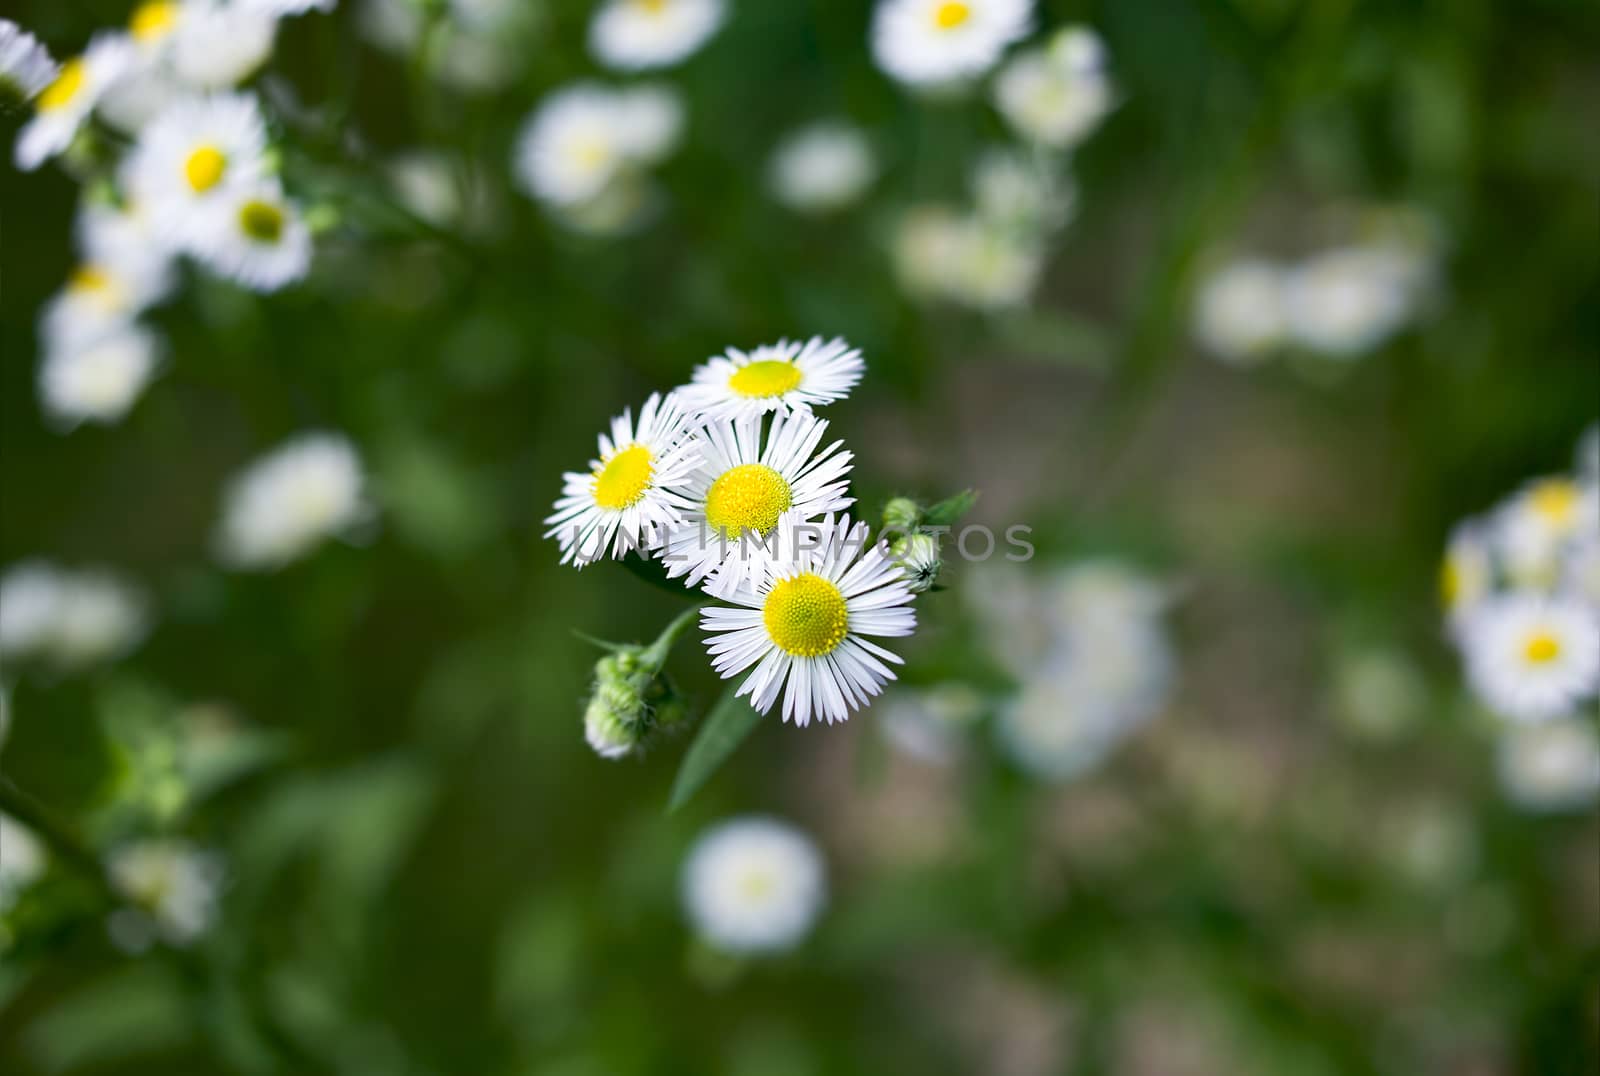 Several small daisies on green blurred background colors